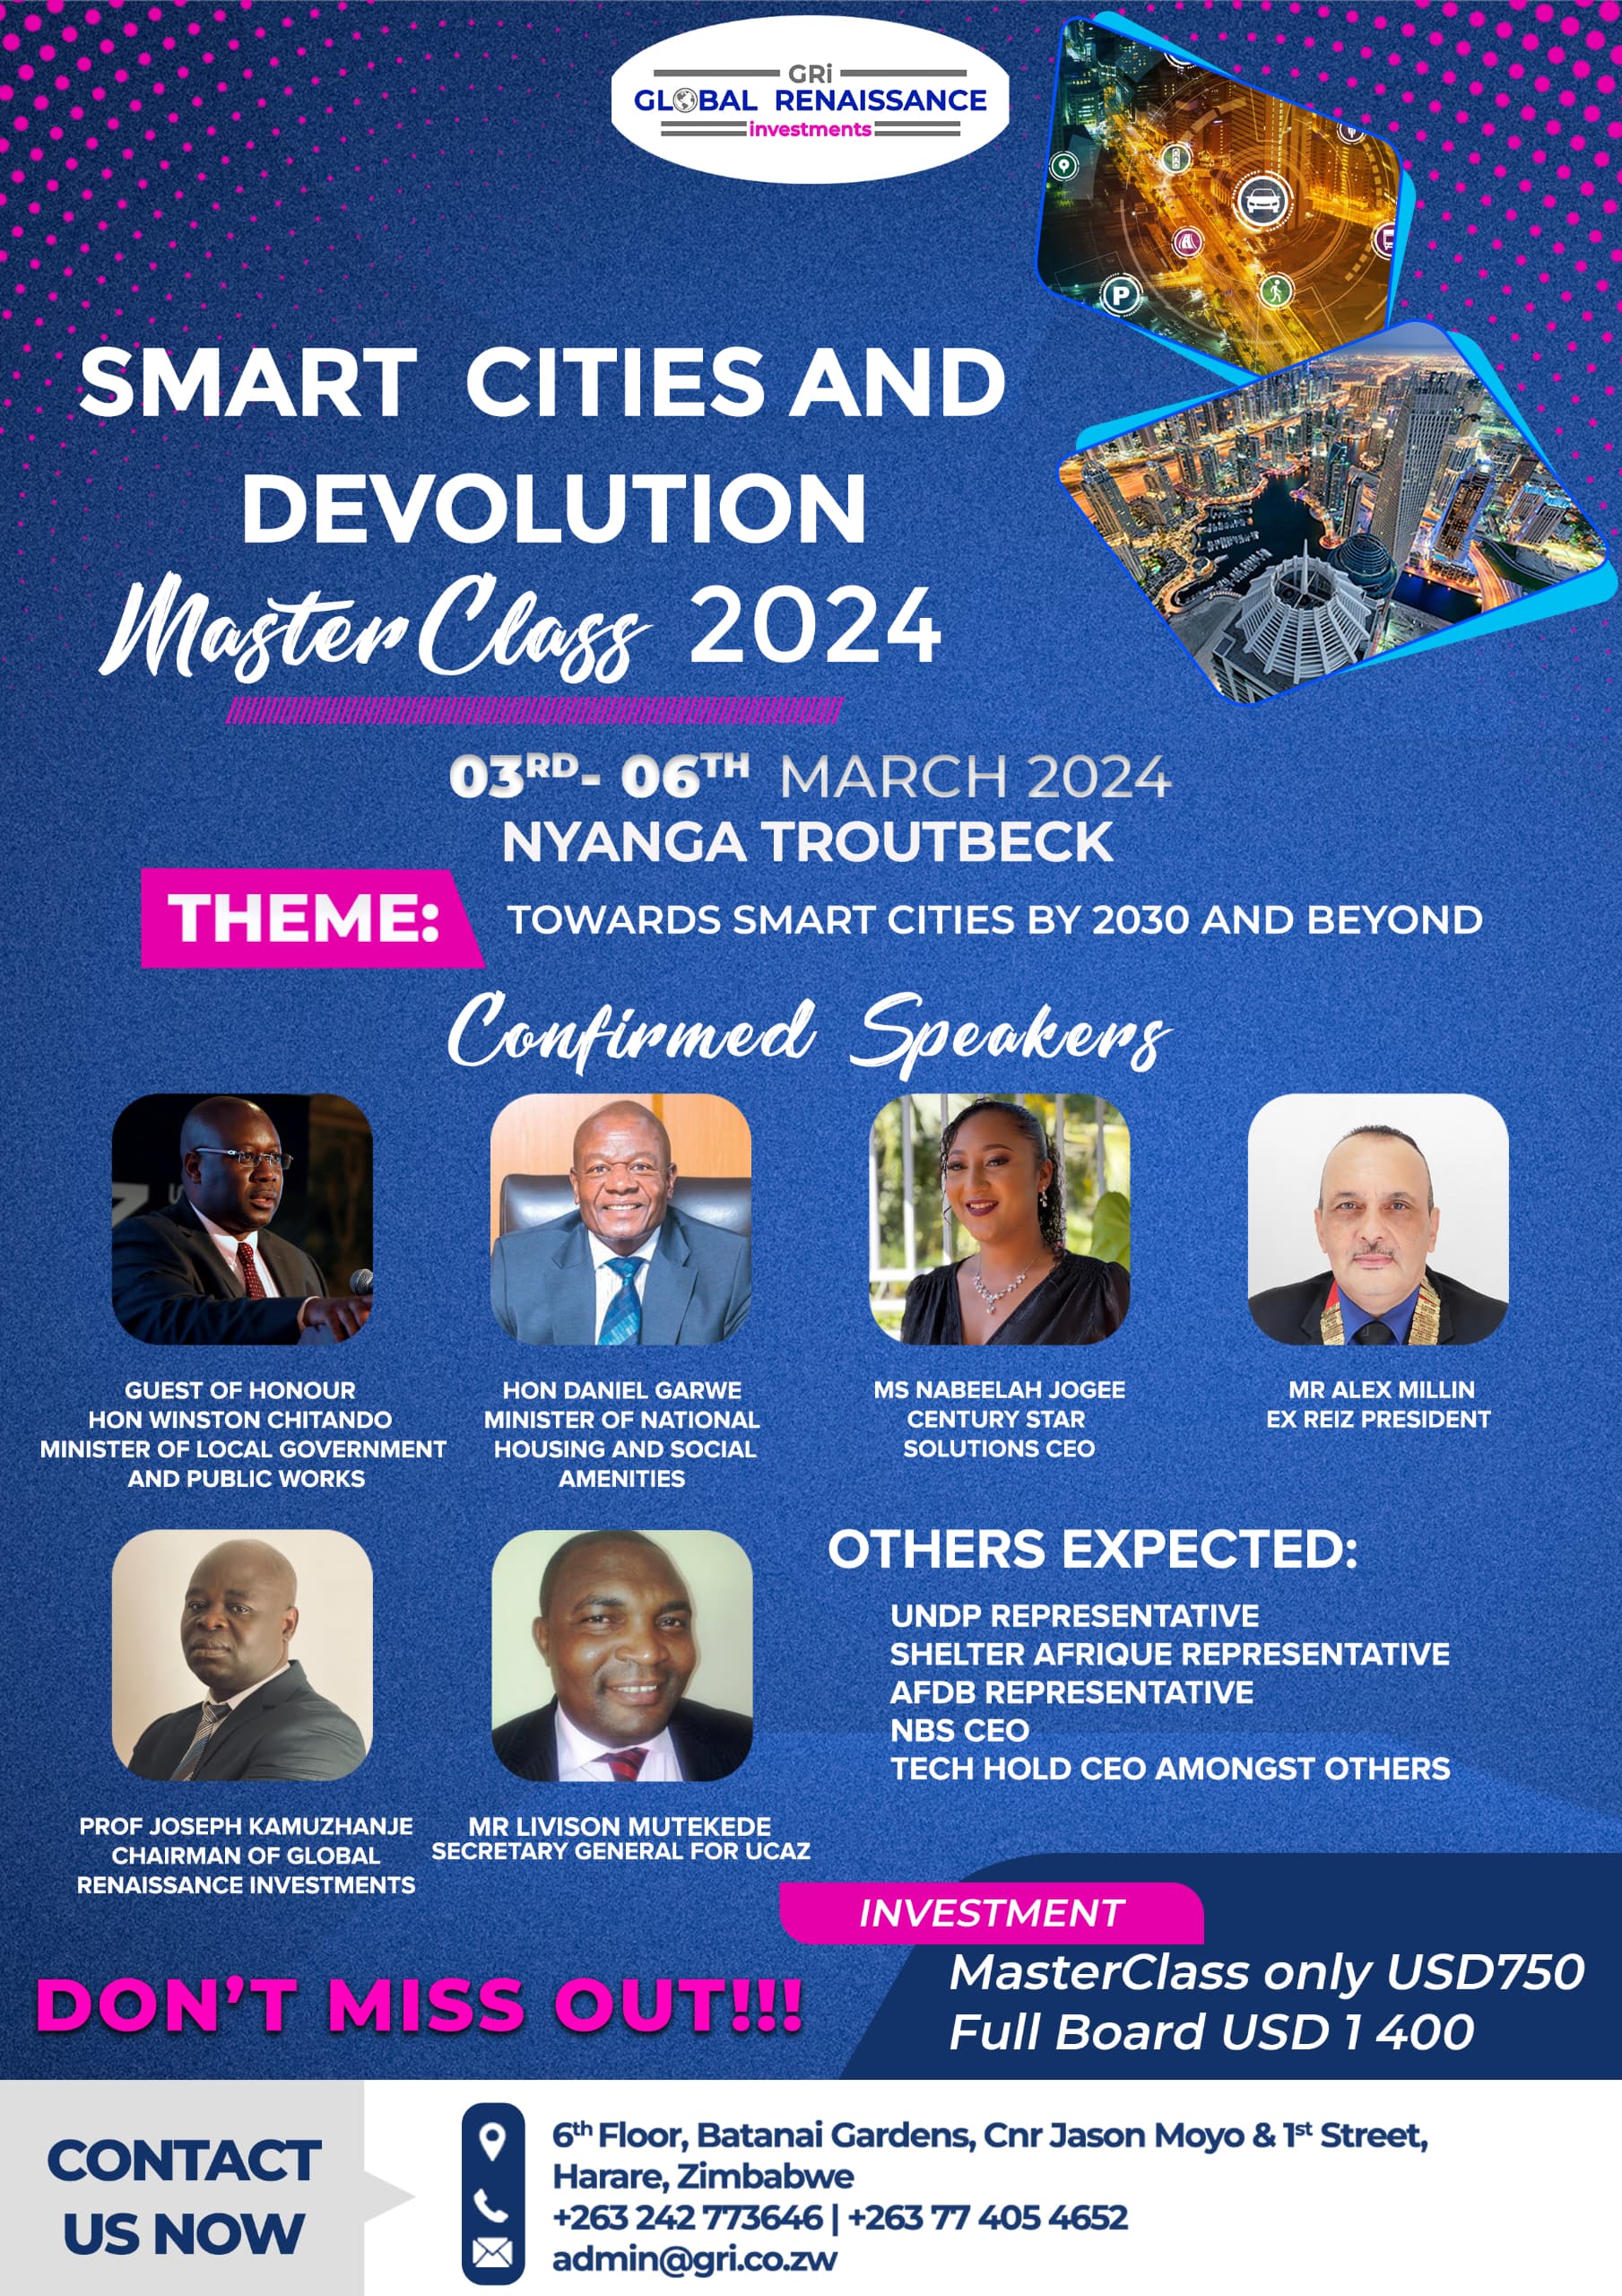 Global Renaissance Investments to host Smart Cities and Devolution Master Class 2024 in Nyanga